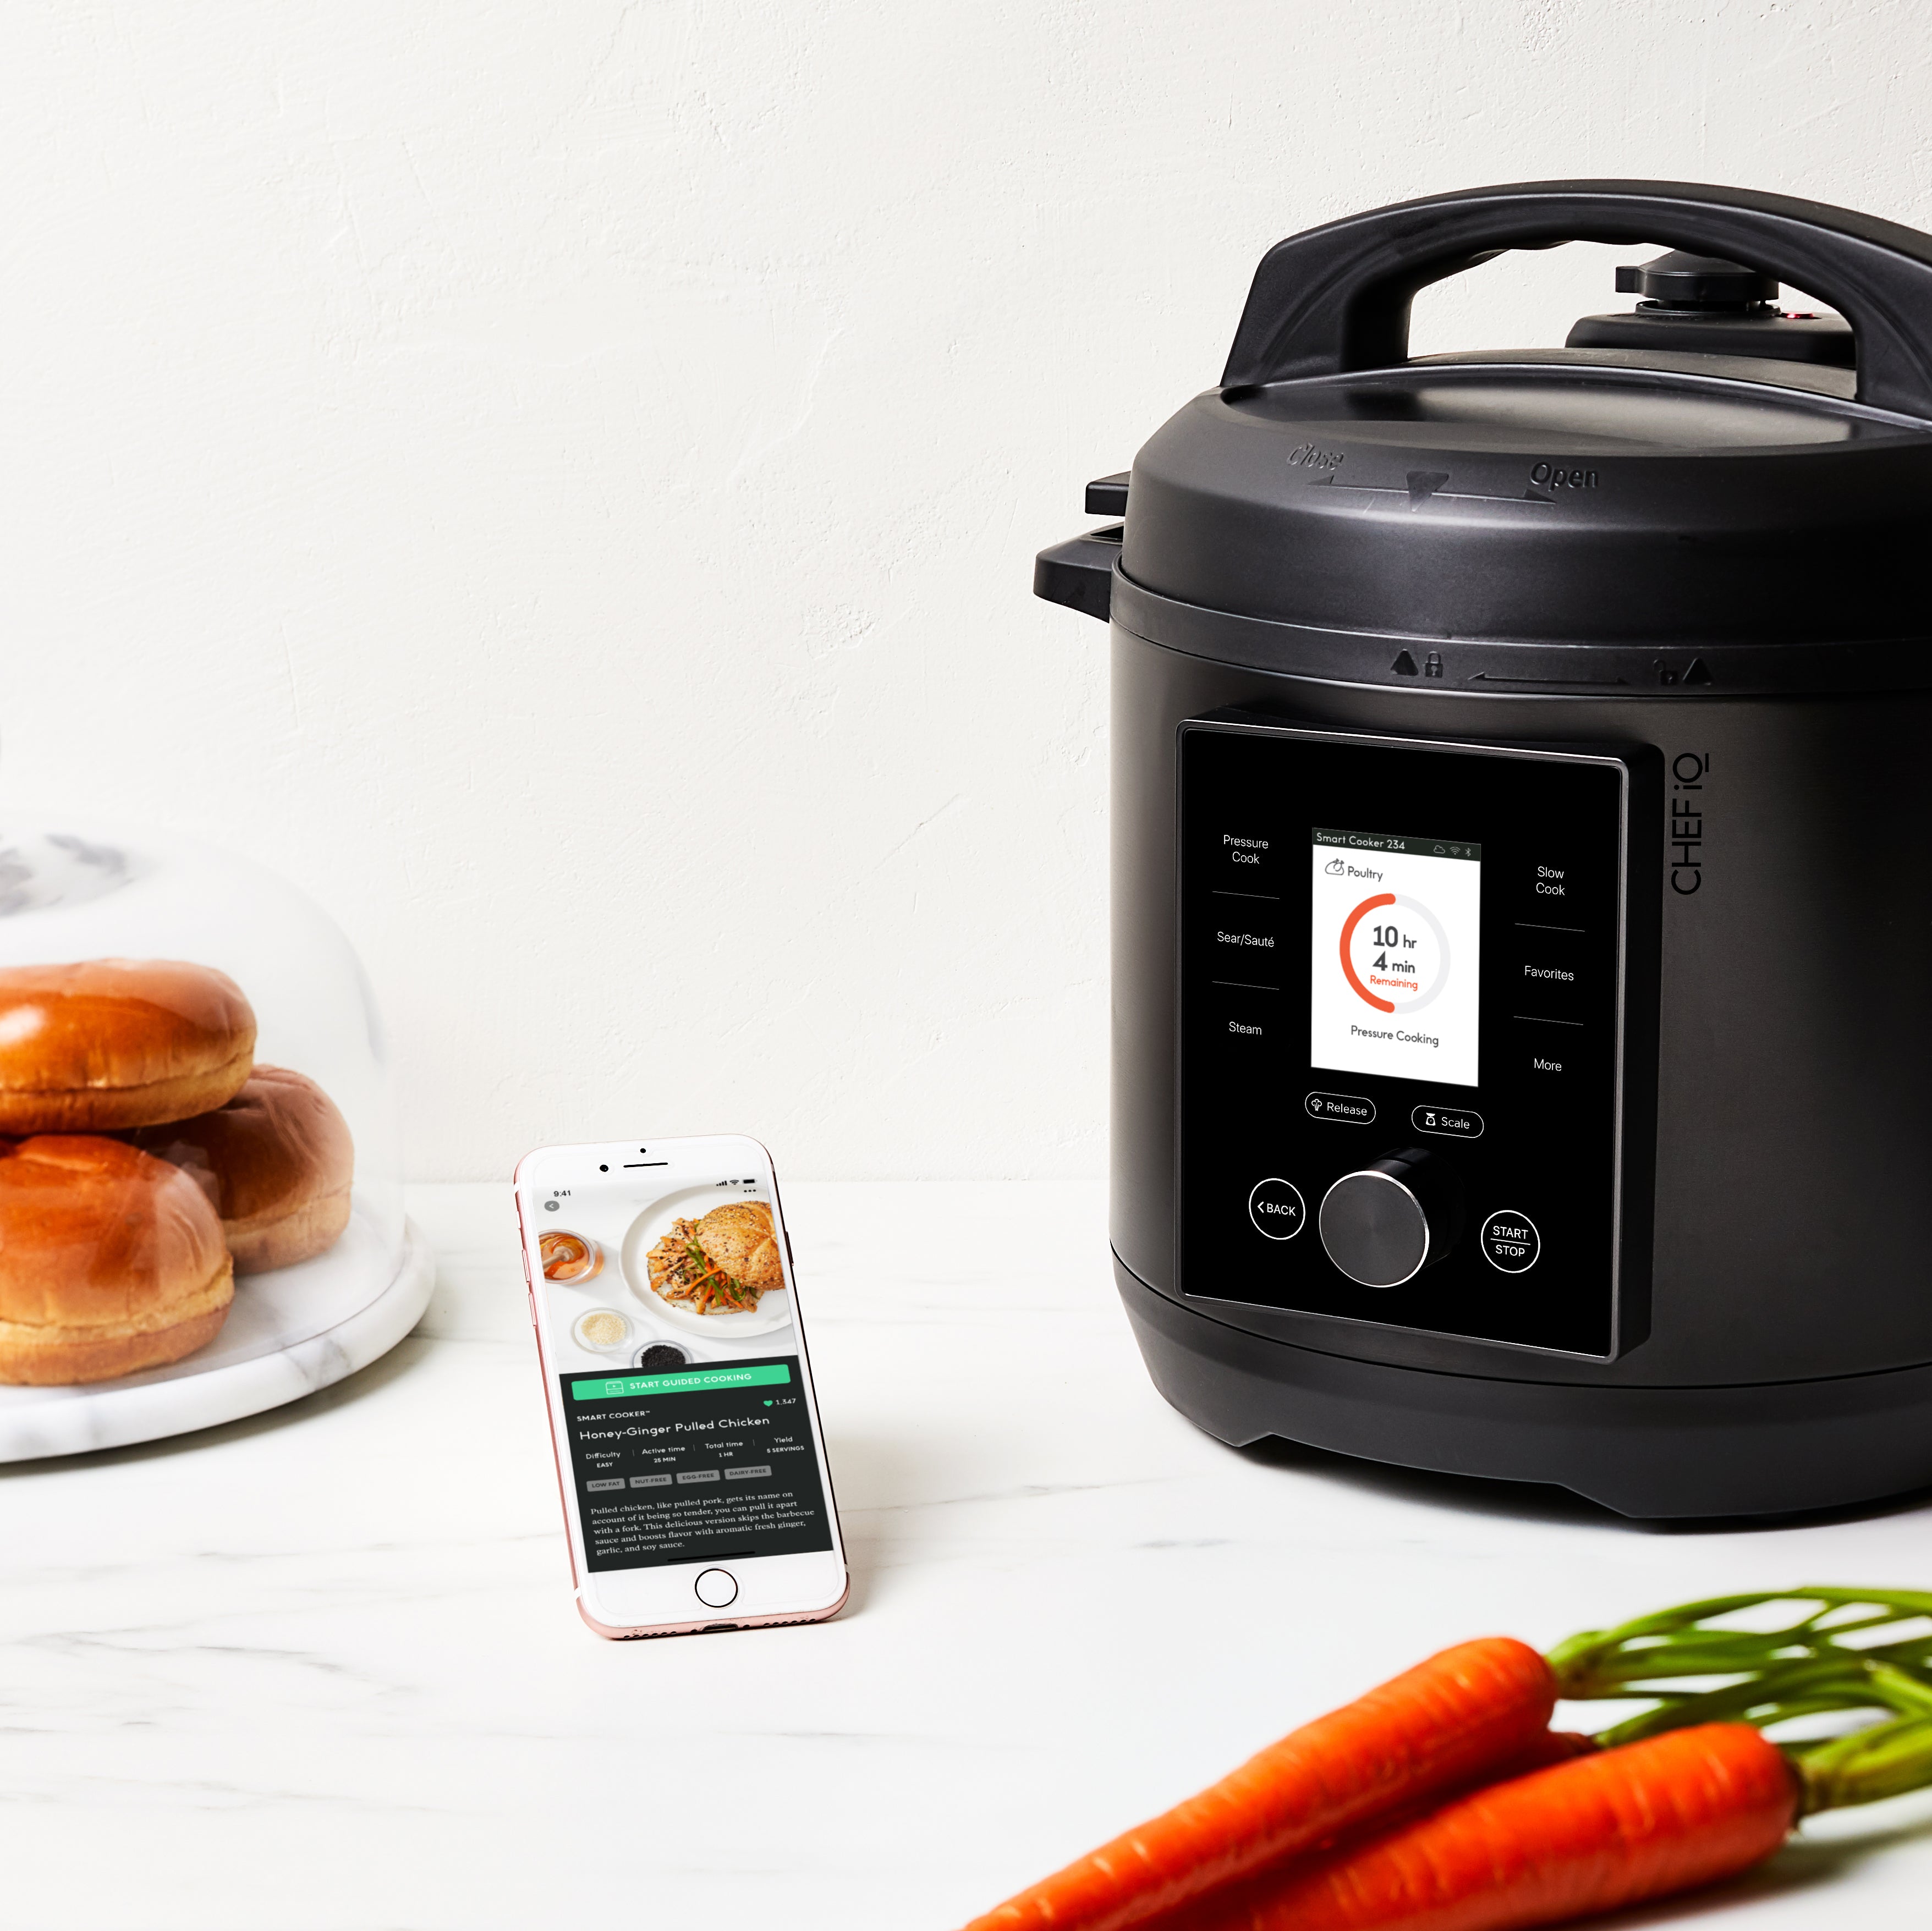 CHEF iQ Smart Cooker Review: Read Our Honest Take